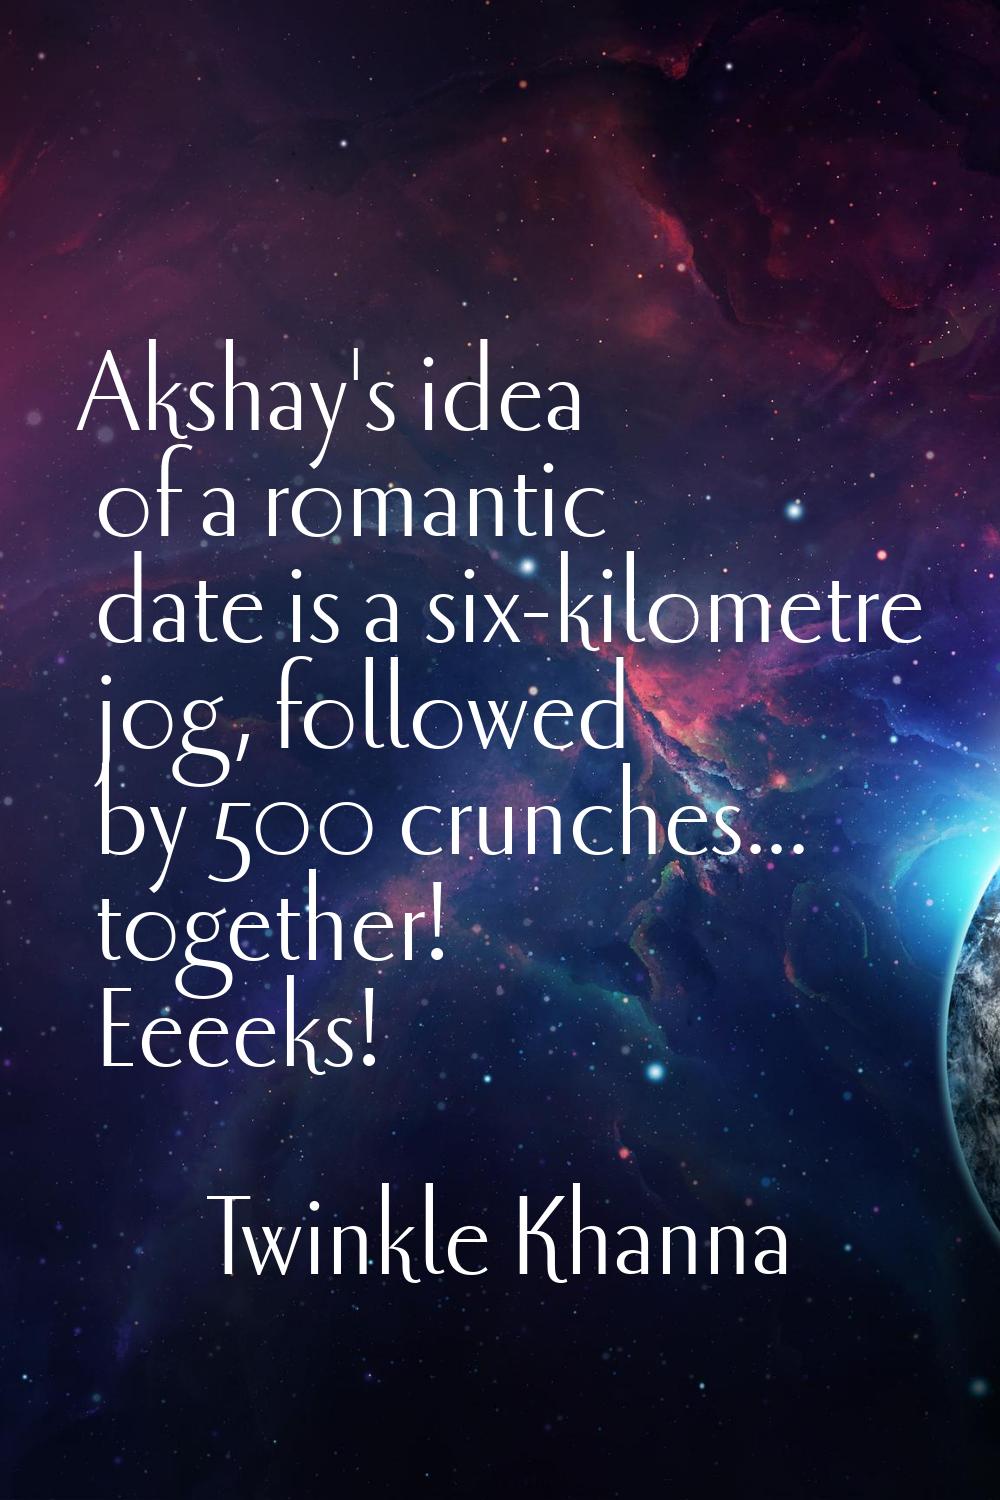 Akshay's idea of a romantic date is a six-kilometre jog, followed by 500 crunches... together! Eeee